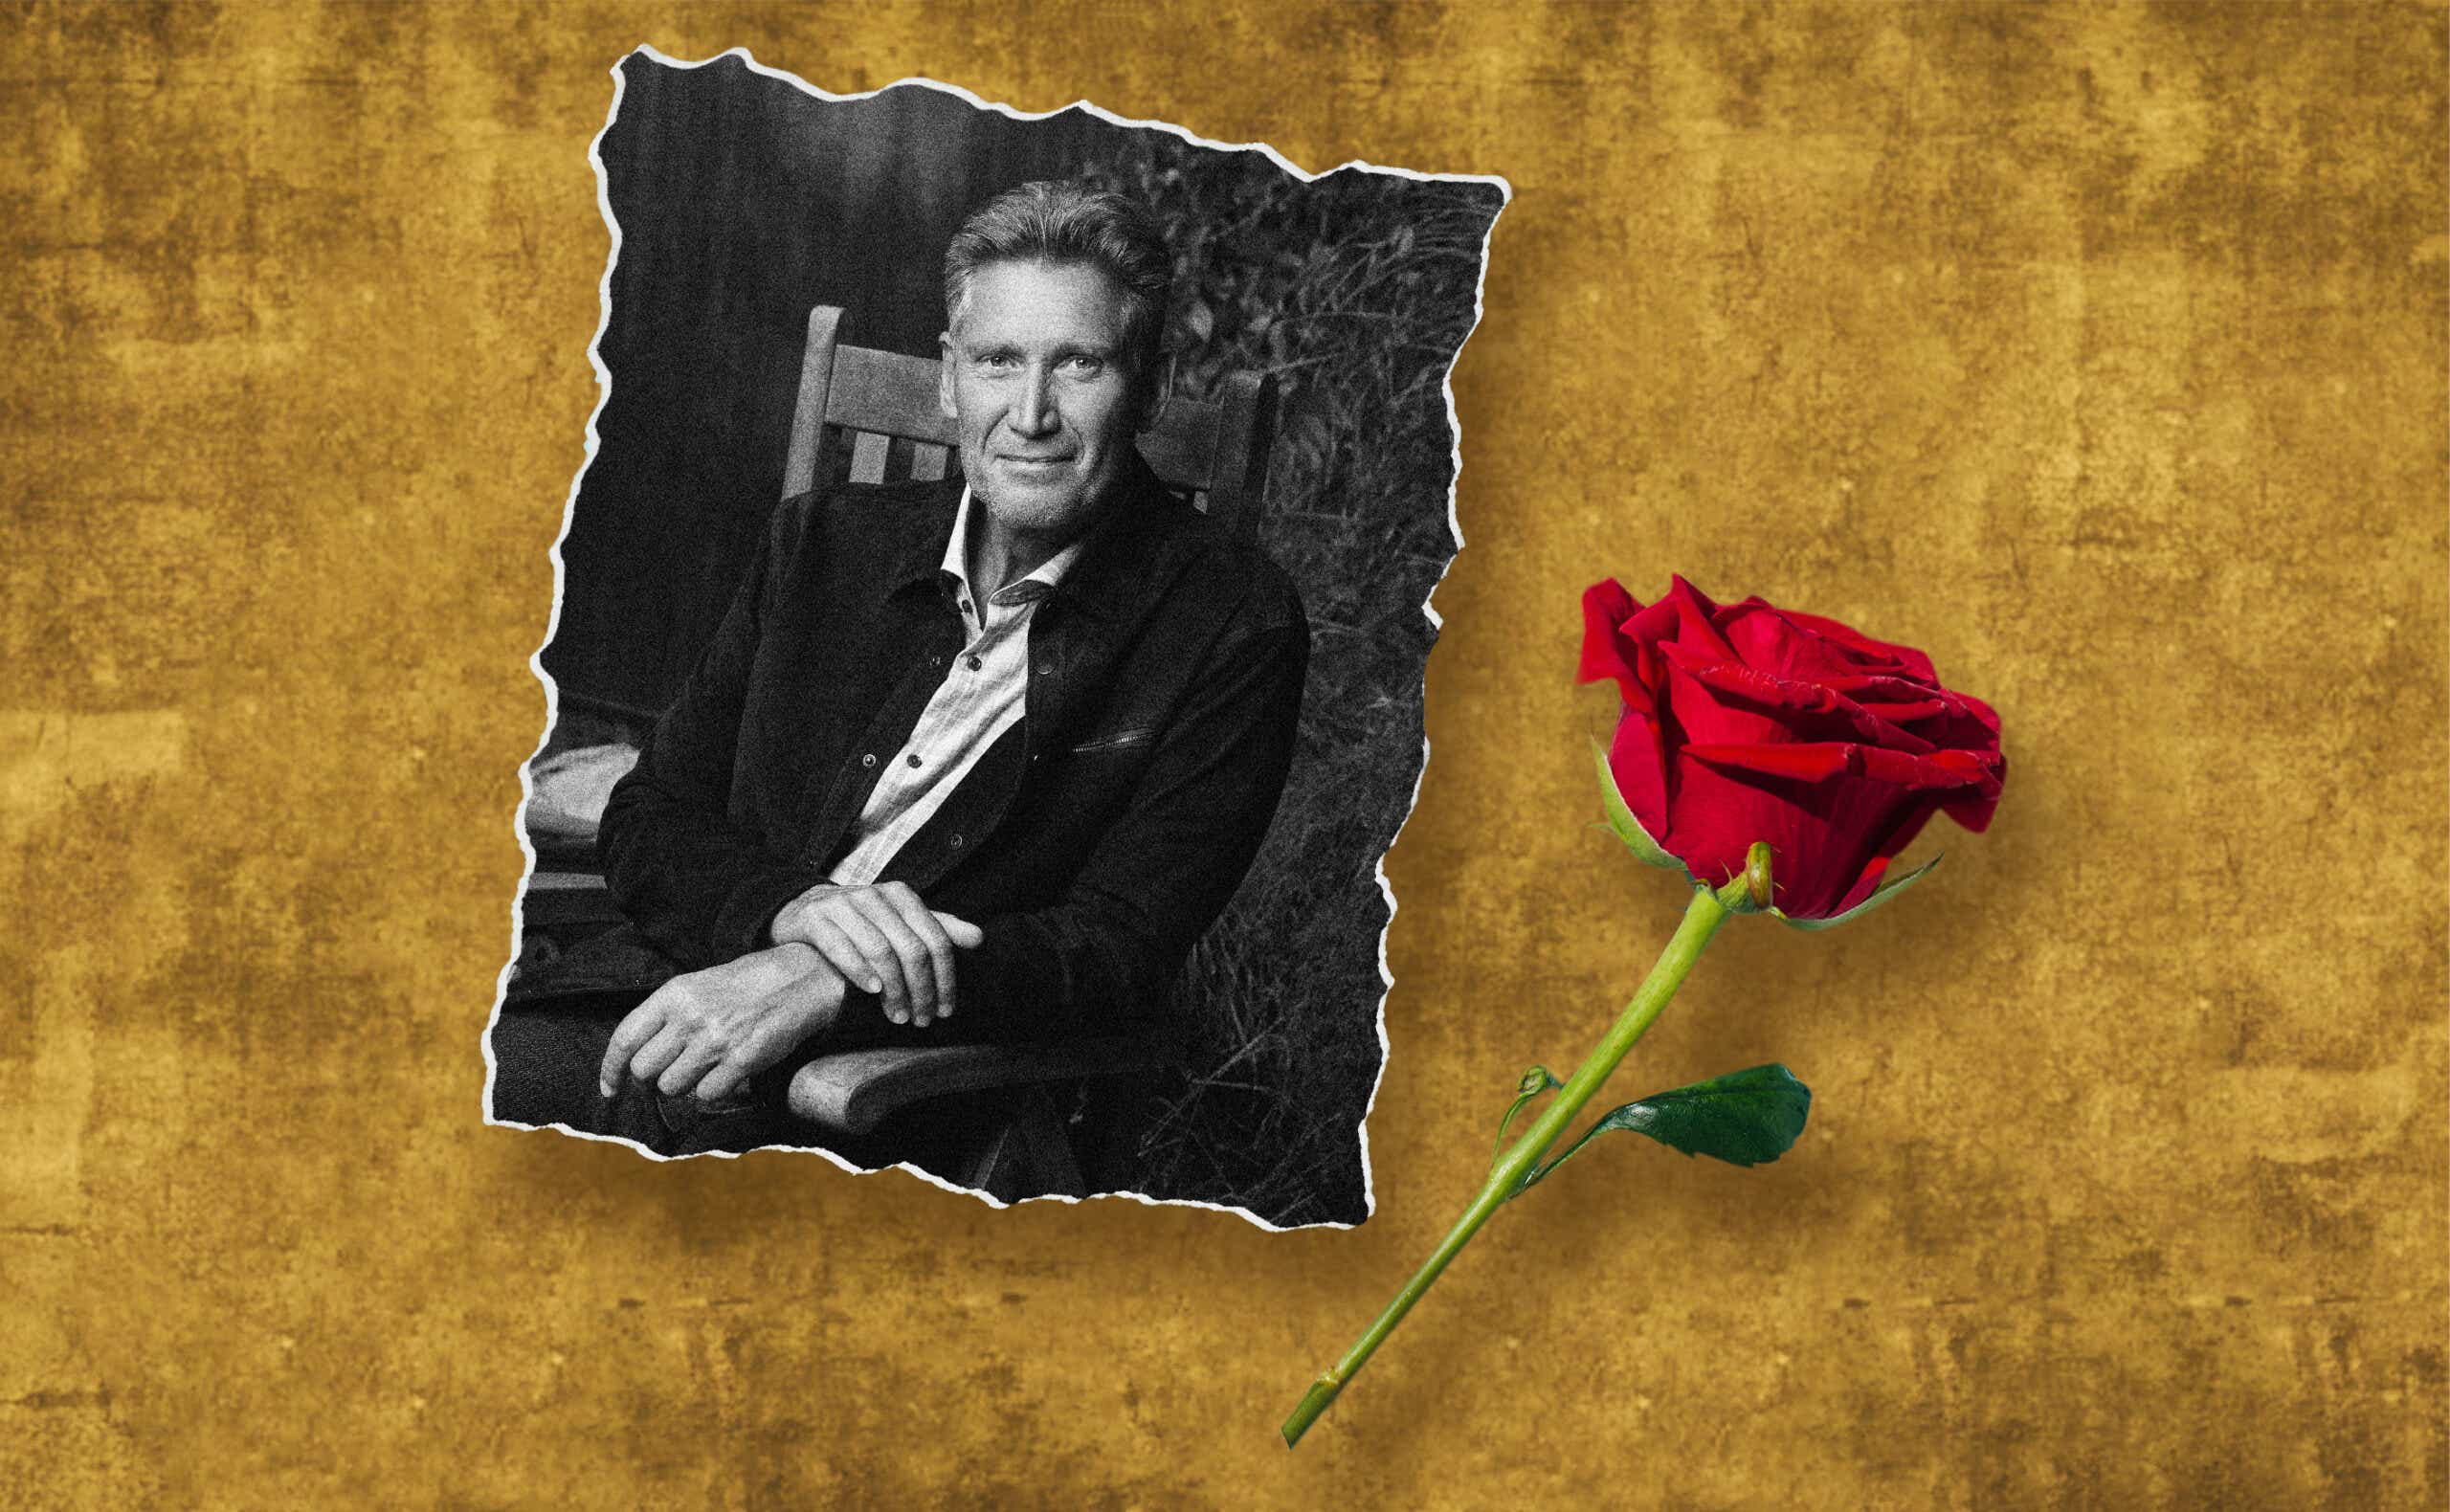 a photo of gerry from the golden bachelor with a rose